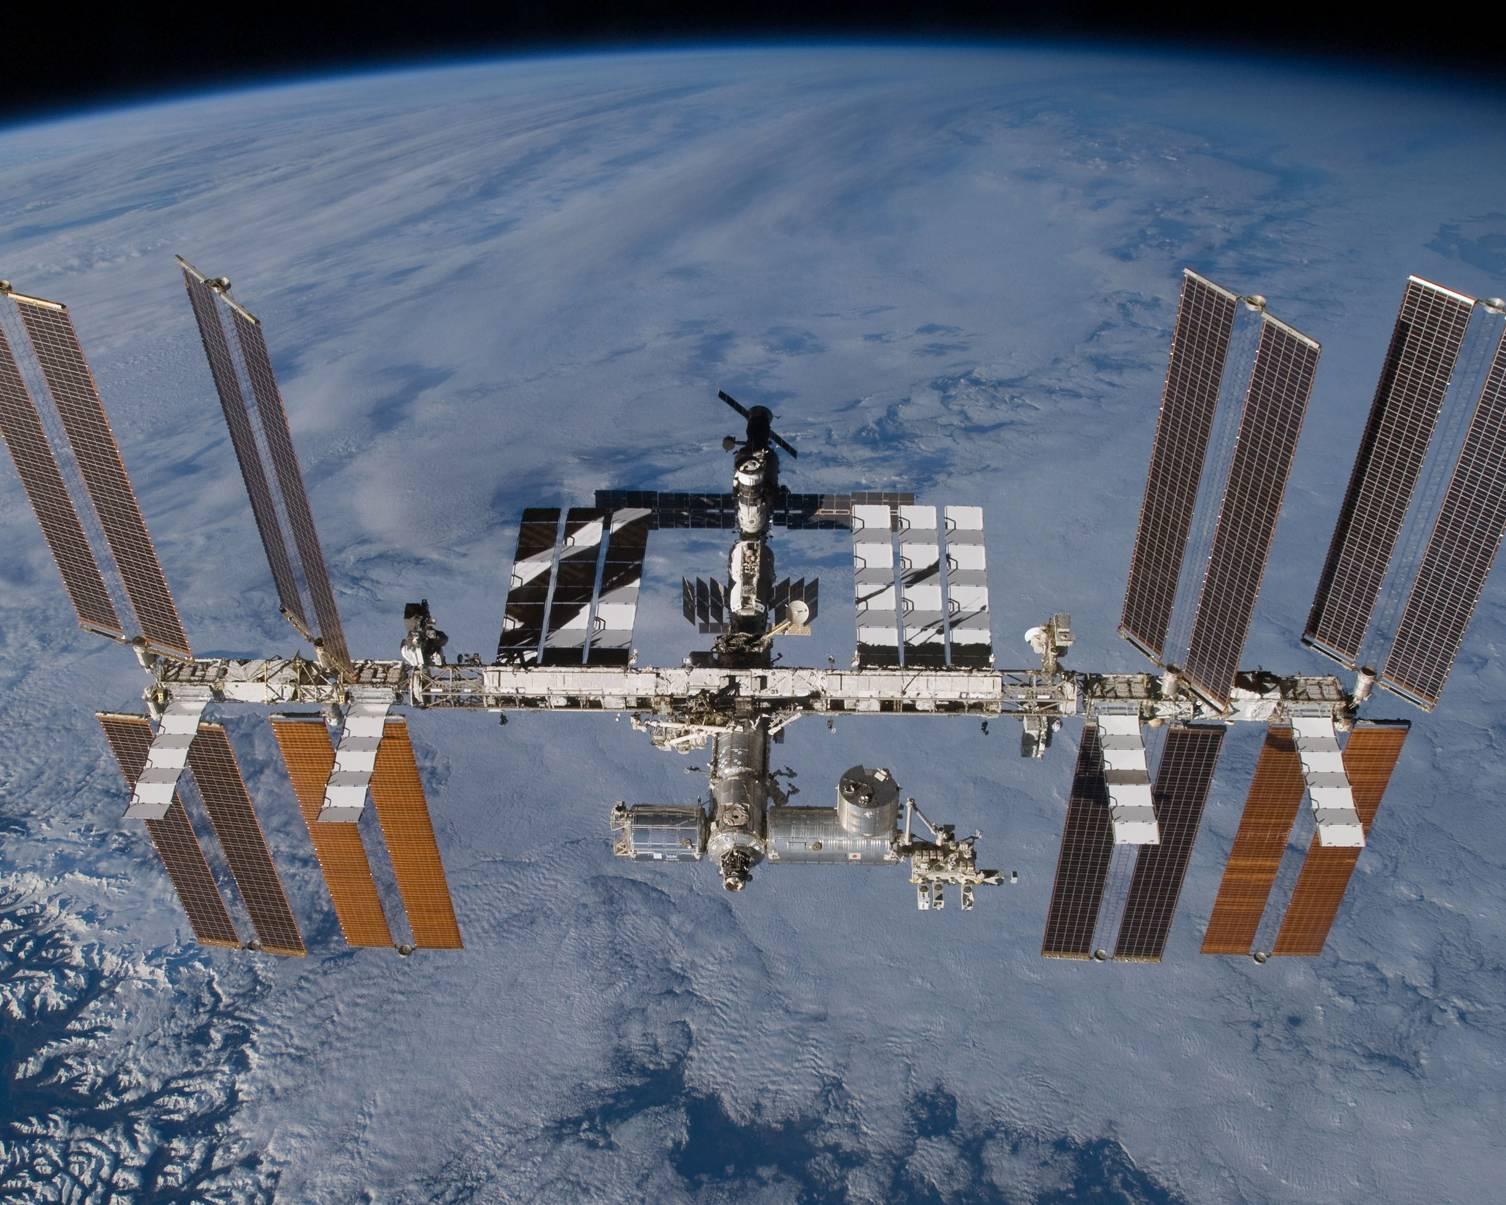 Russia must decide whether to withdraw from the International Space Station